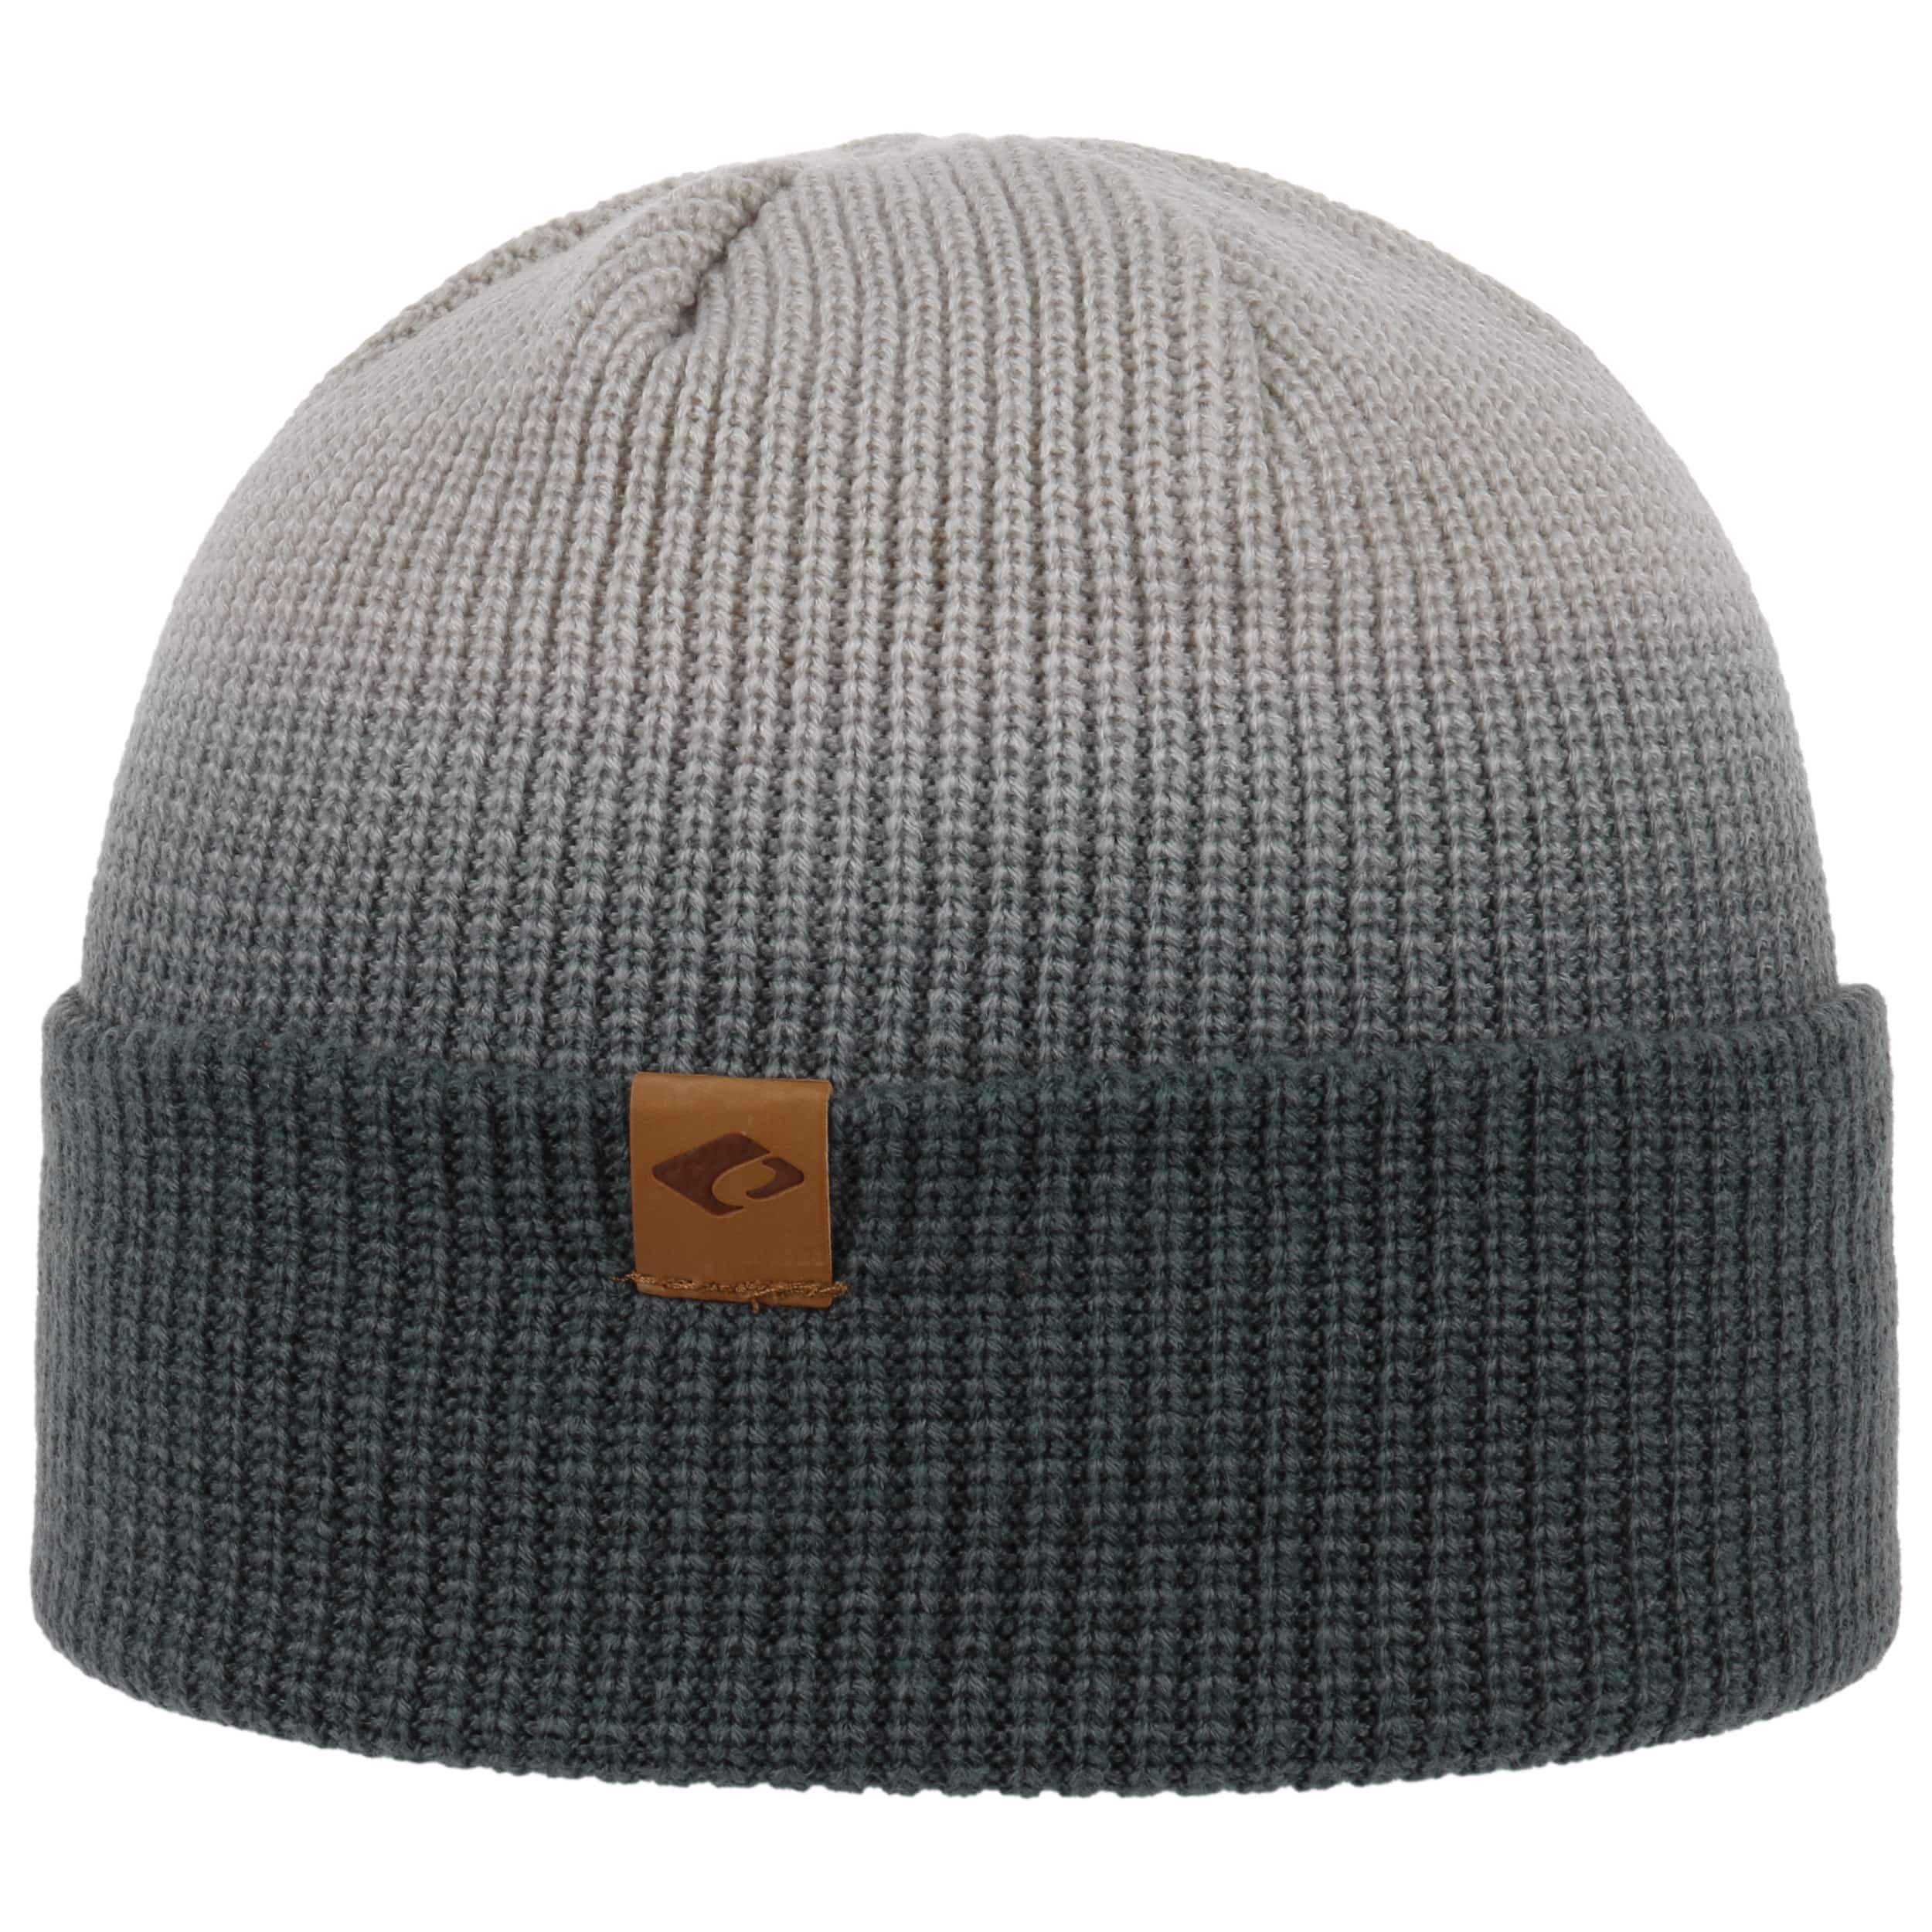 23,95 by - Yoshi Beanie Chillouts Hat £